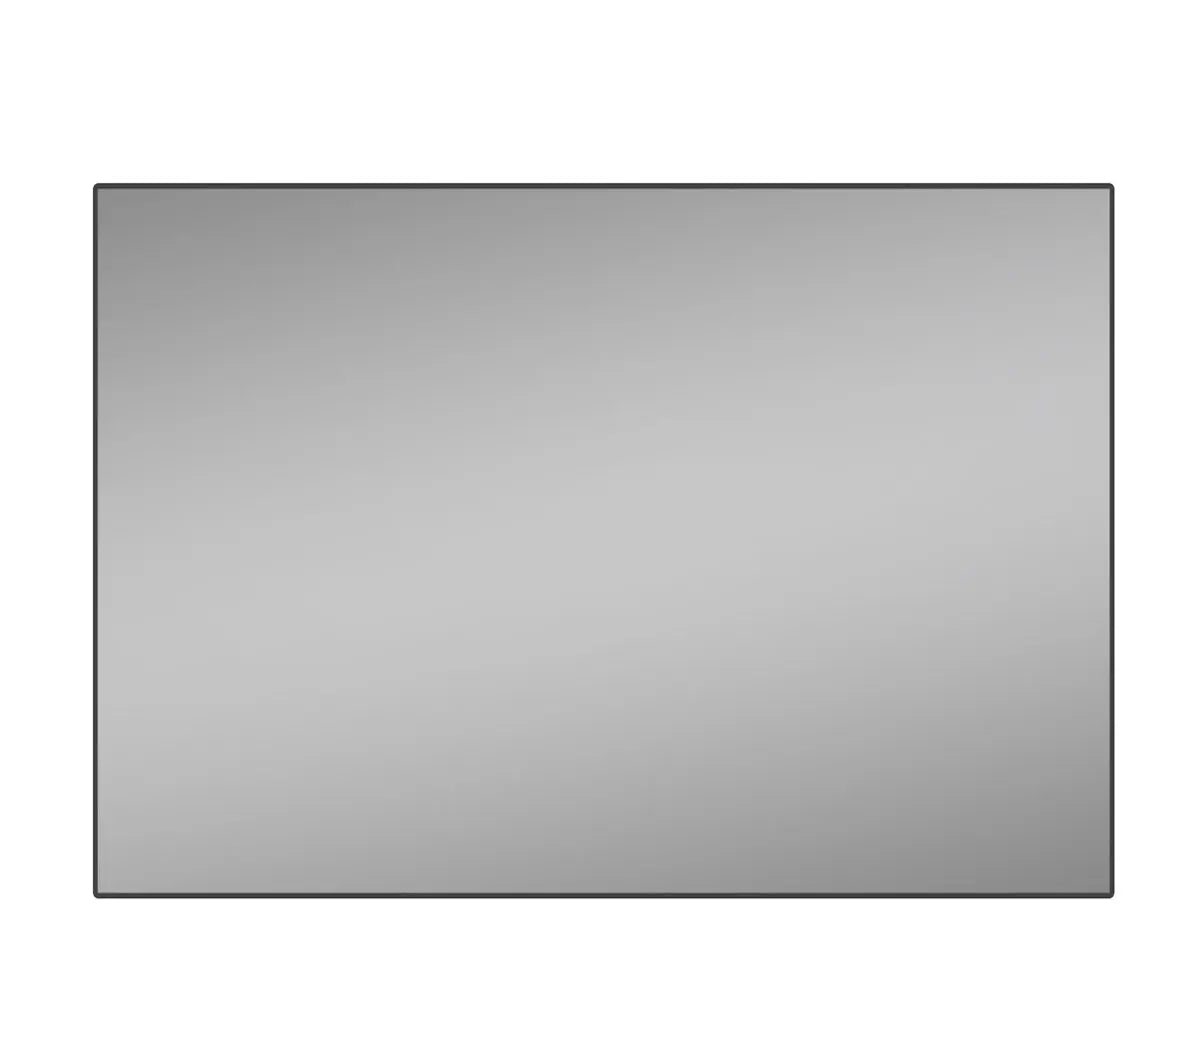 Grandview 100" ALR Fixed Frame 16:9 For Ultra Short Throw Projector Screen - GV-ALRUST100H - Masters Voice Audio Visual